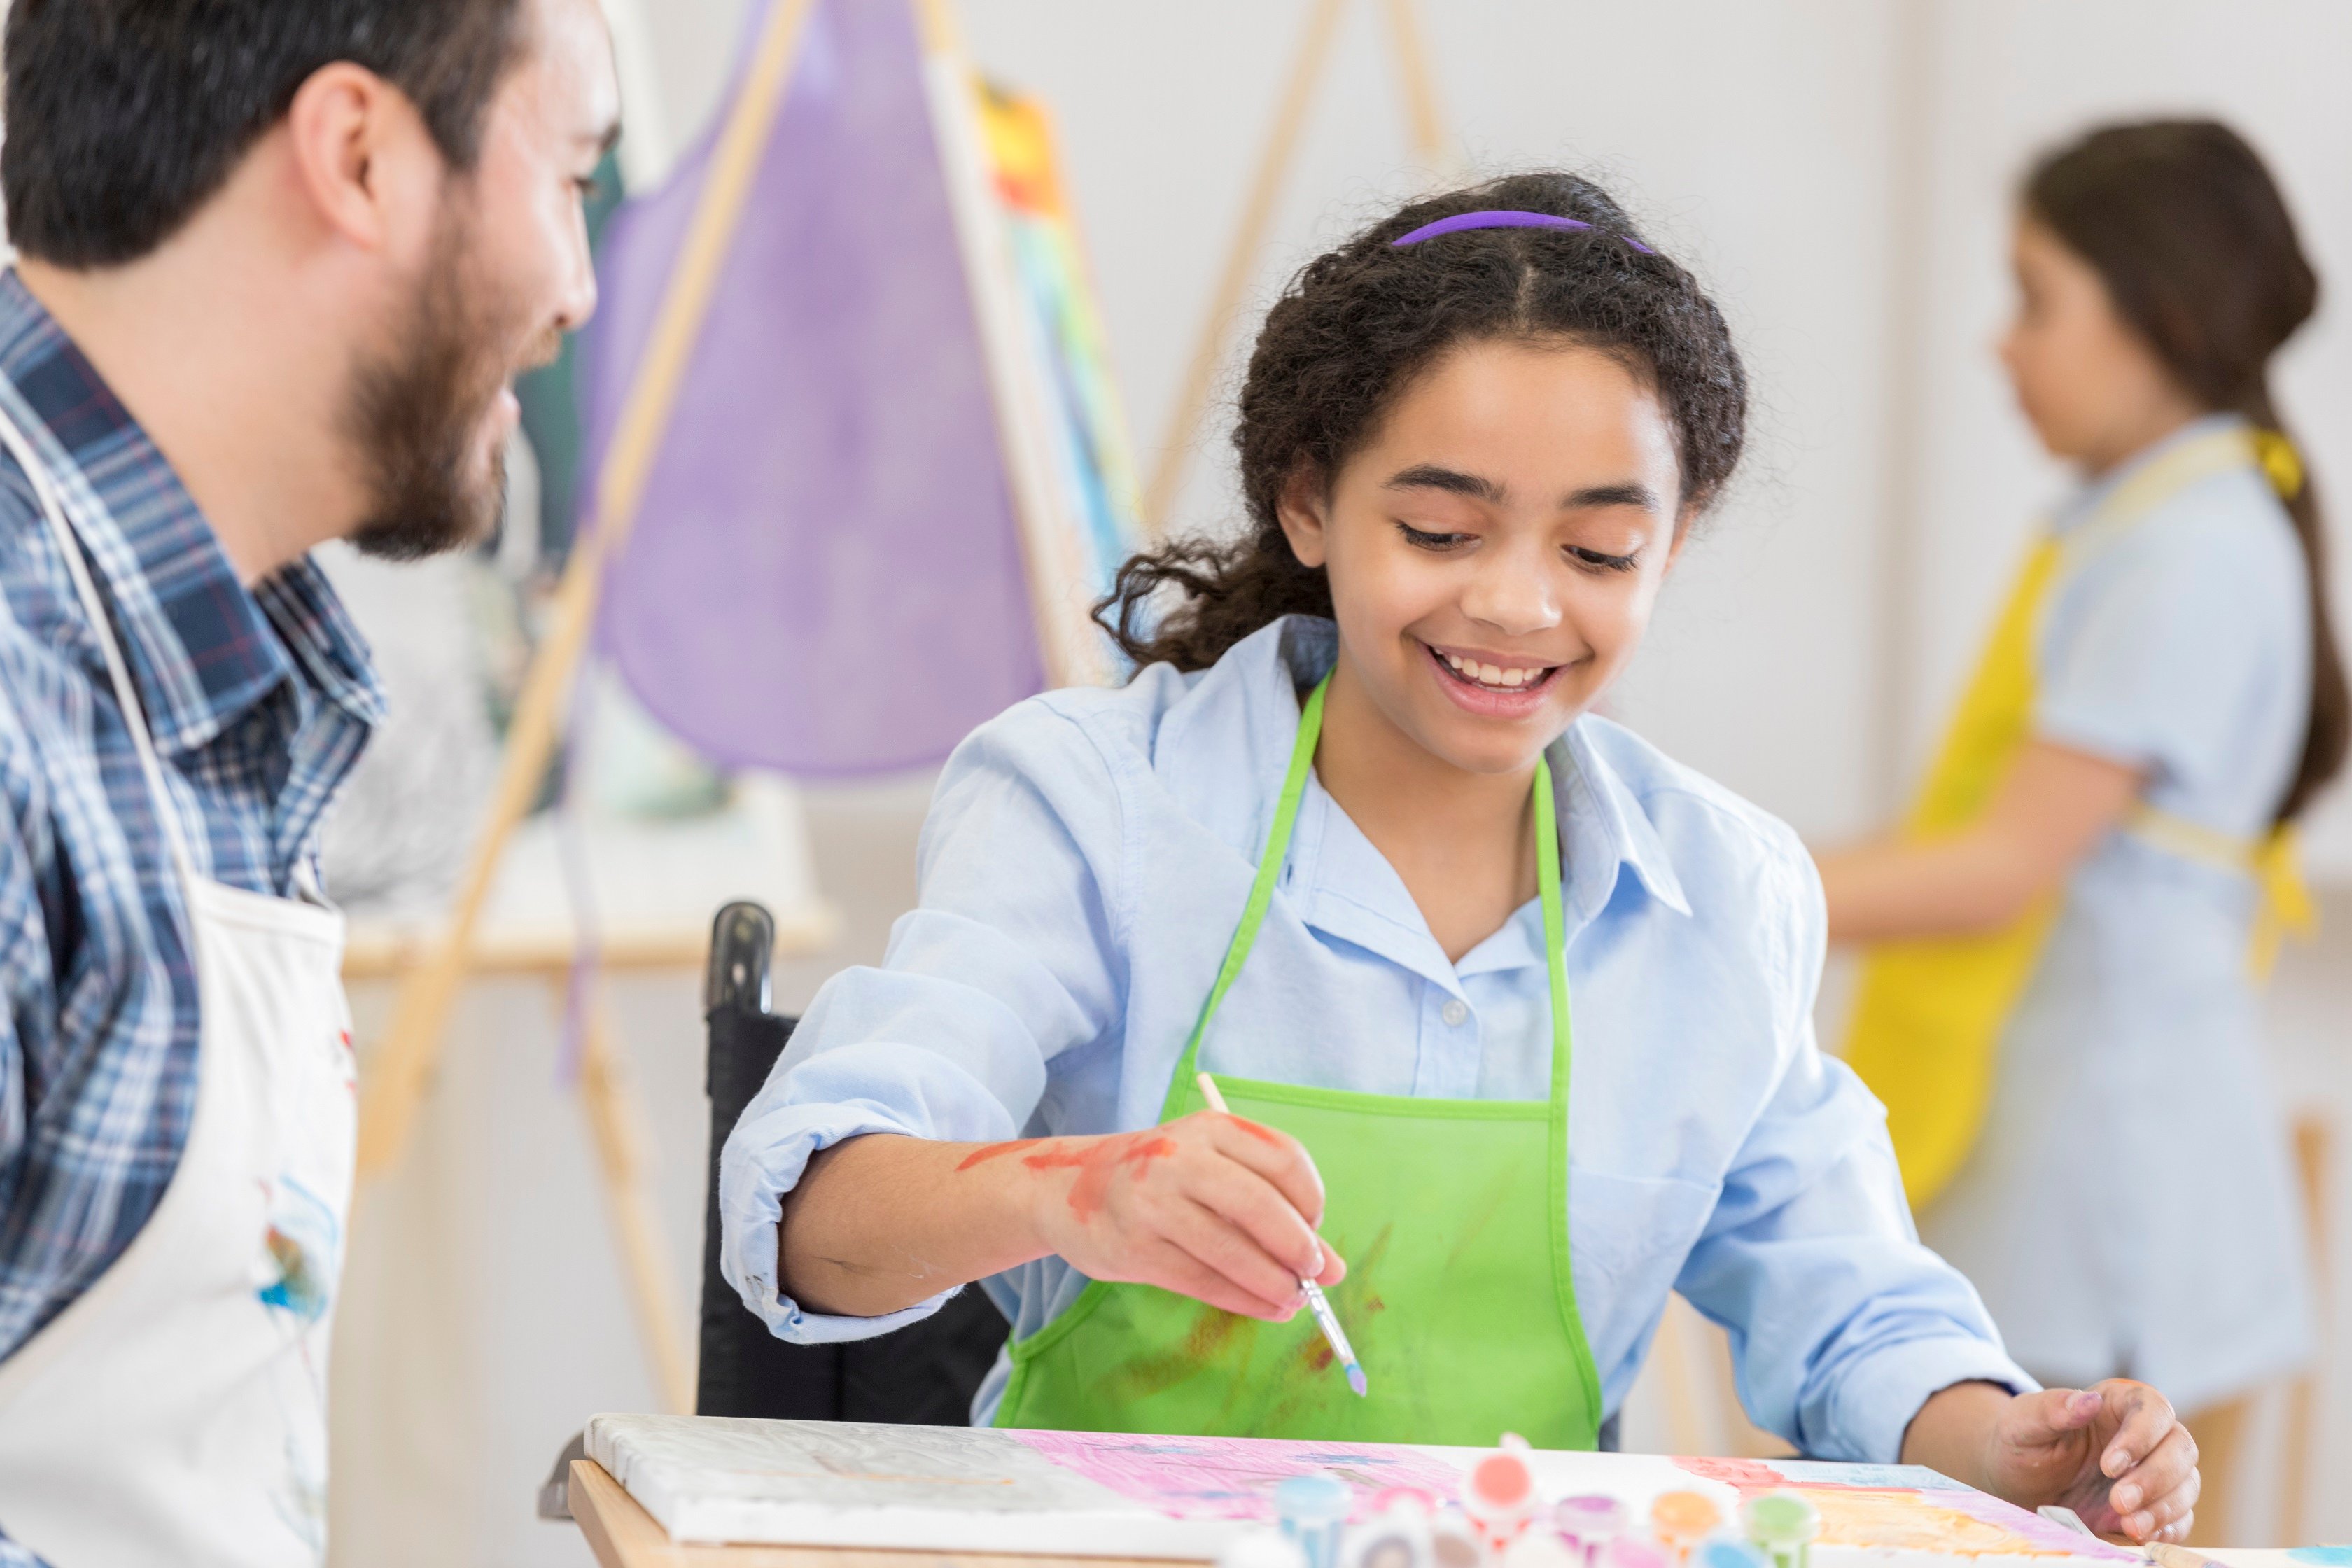 Why we believe arts enrichment activities are important